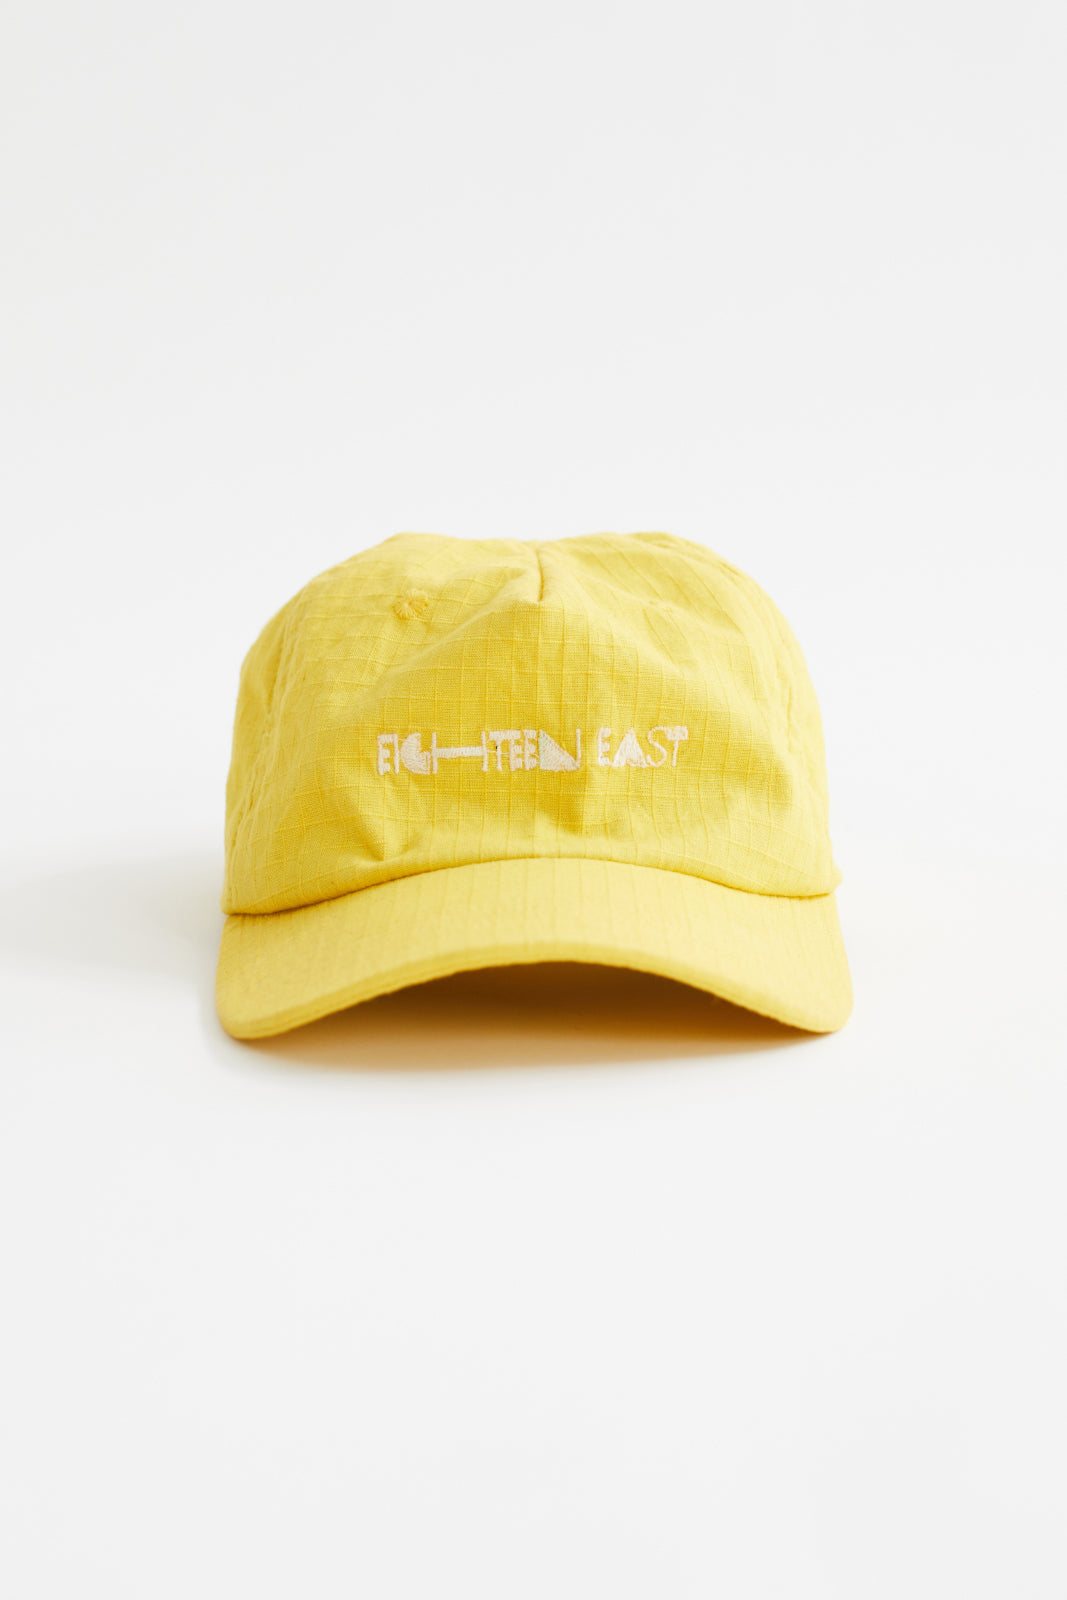 STOWE FIVE PANEL HAT - GOLDEN RAY RIPSTOP